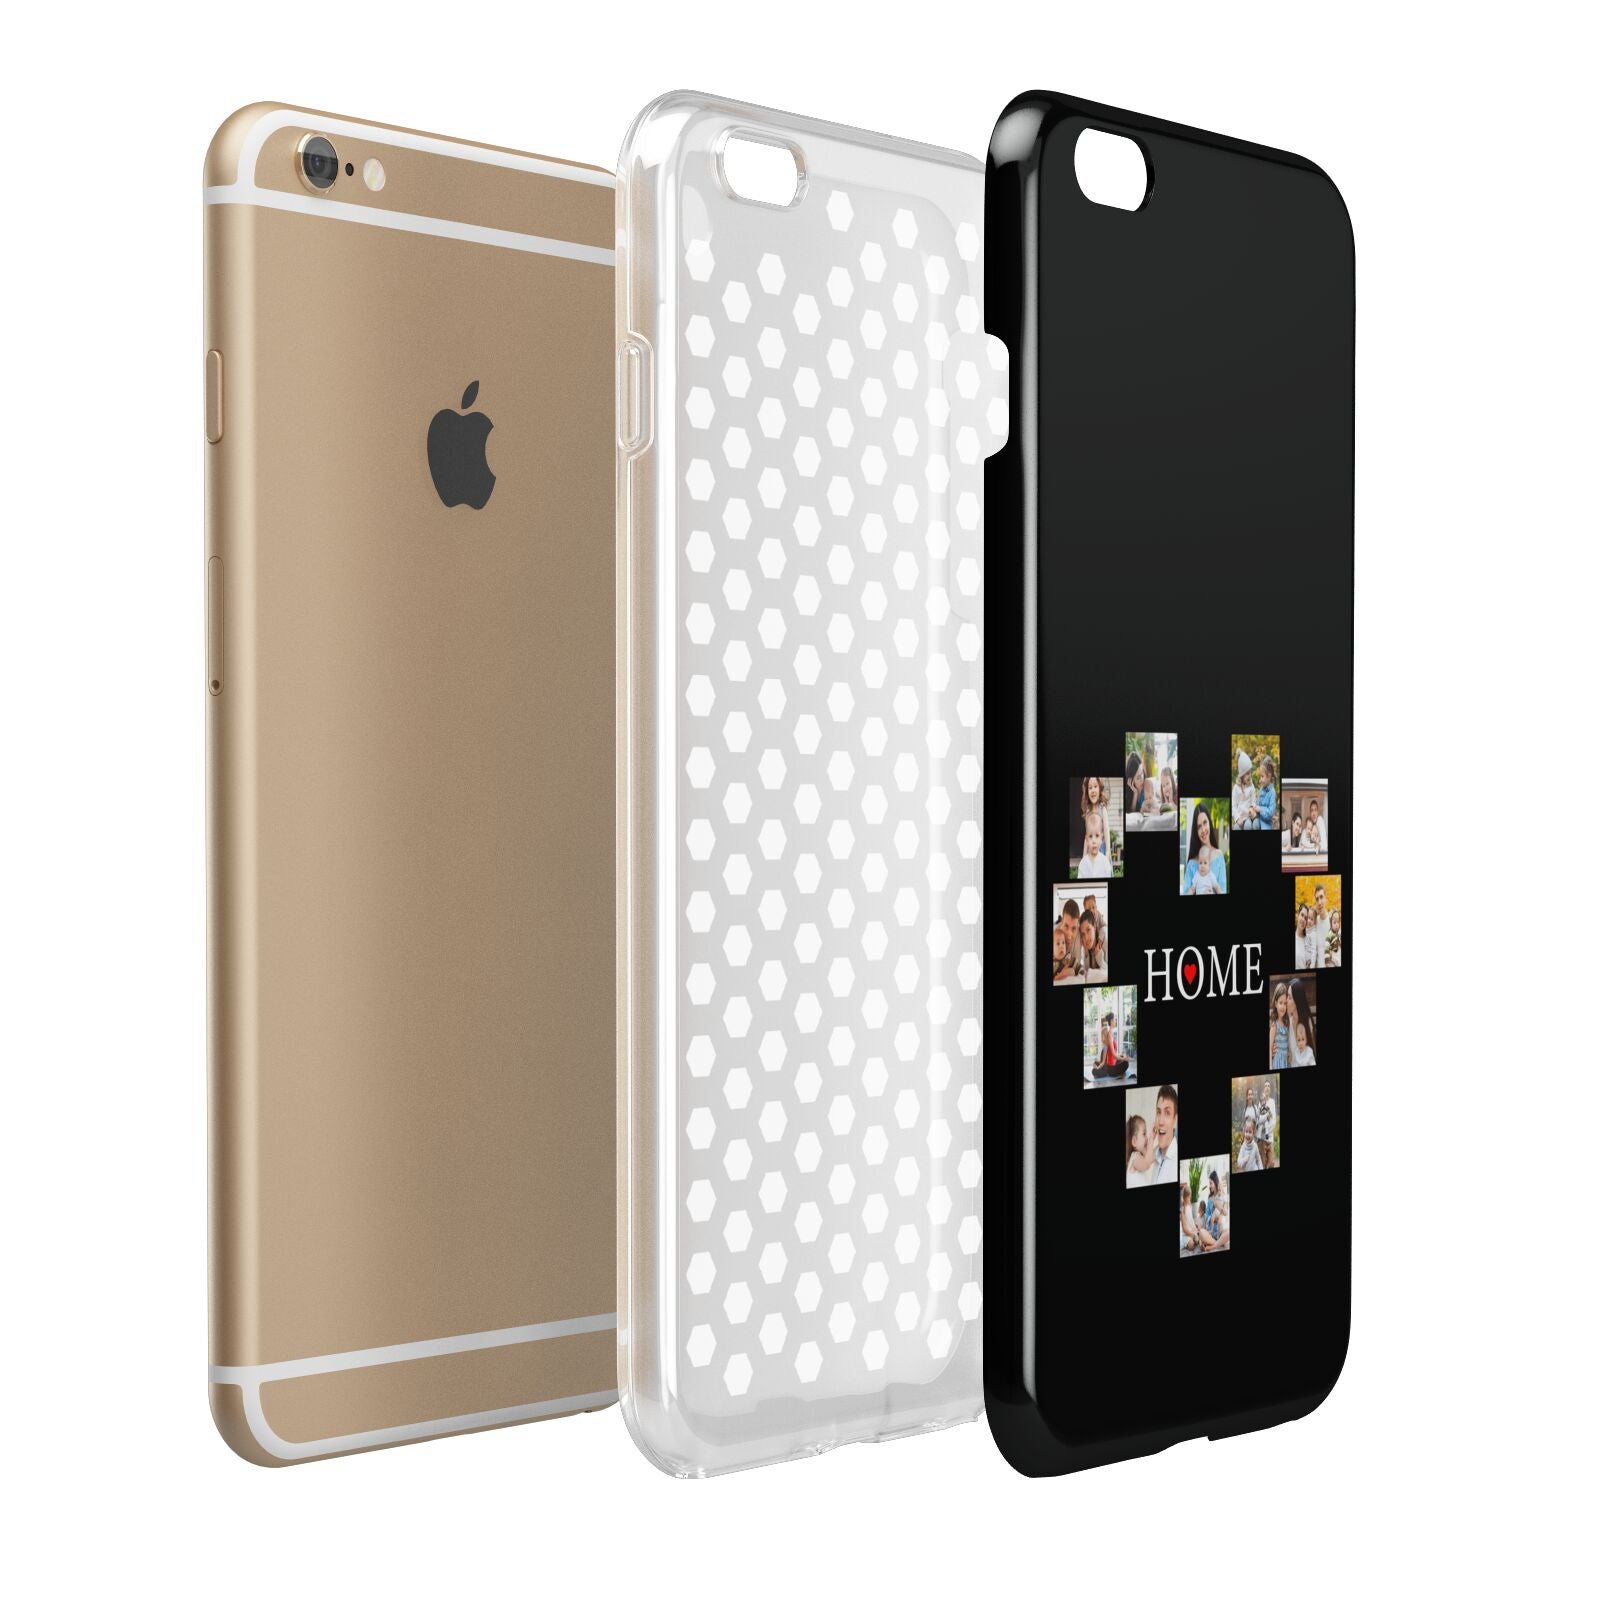 Photos of Home Personalised Apple iPhone 6 Plus 3D Tough Case Expand Detail Image